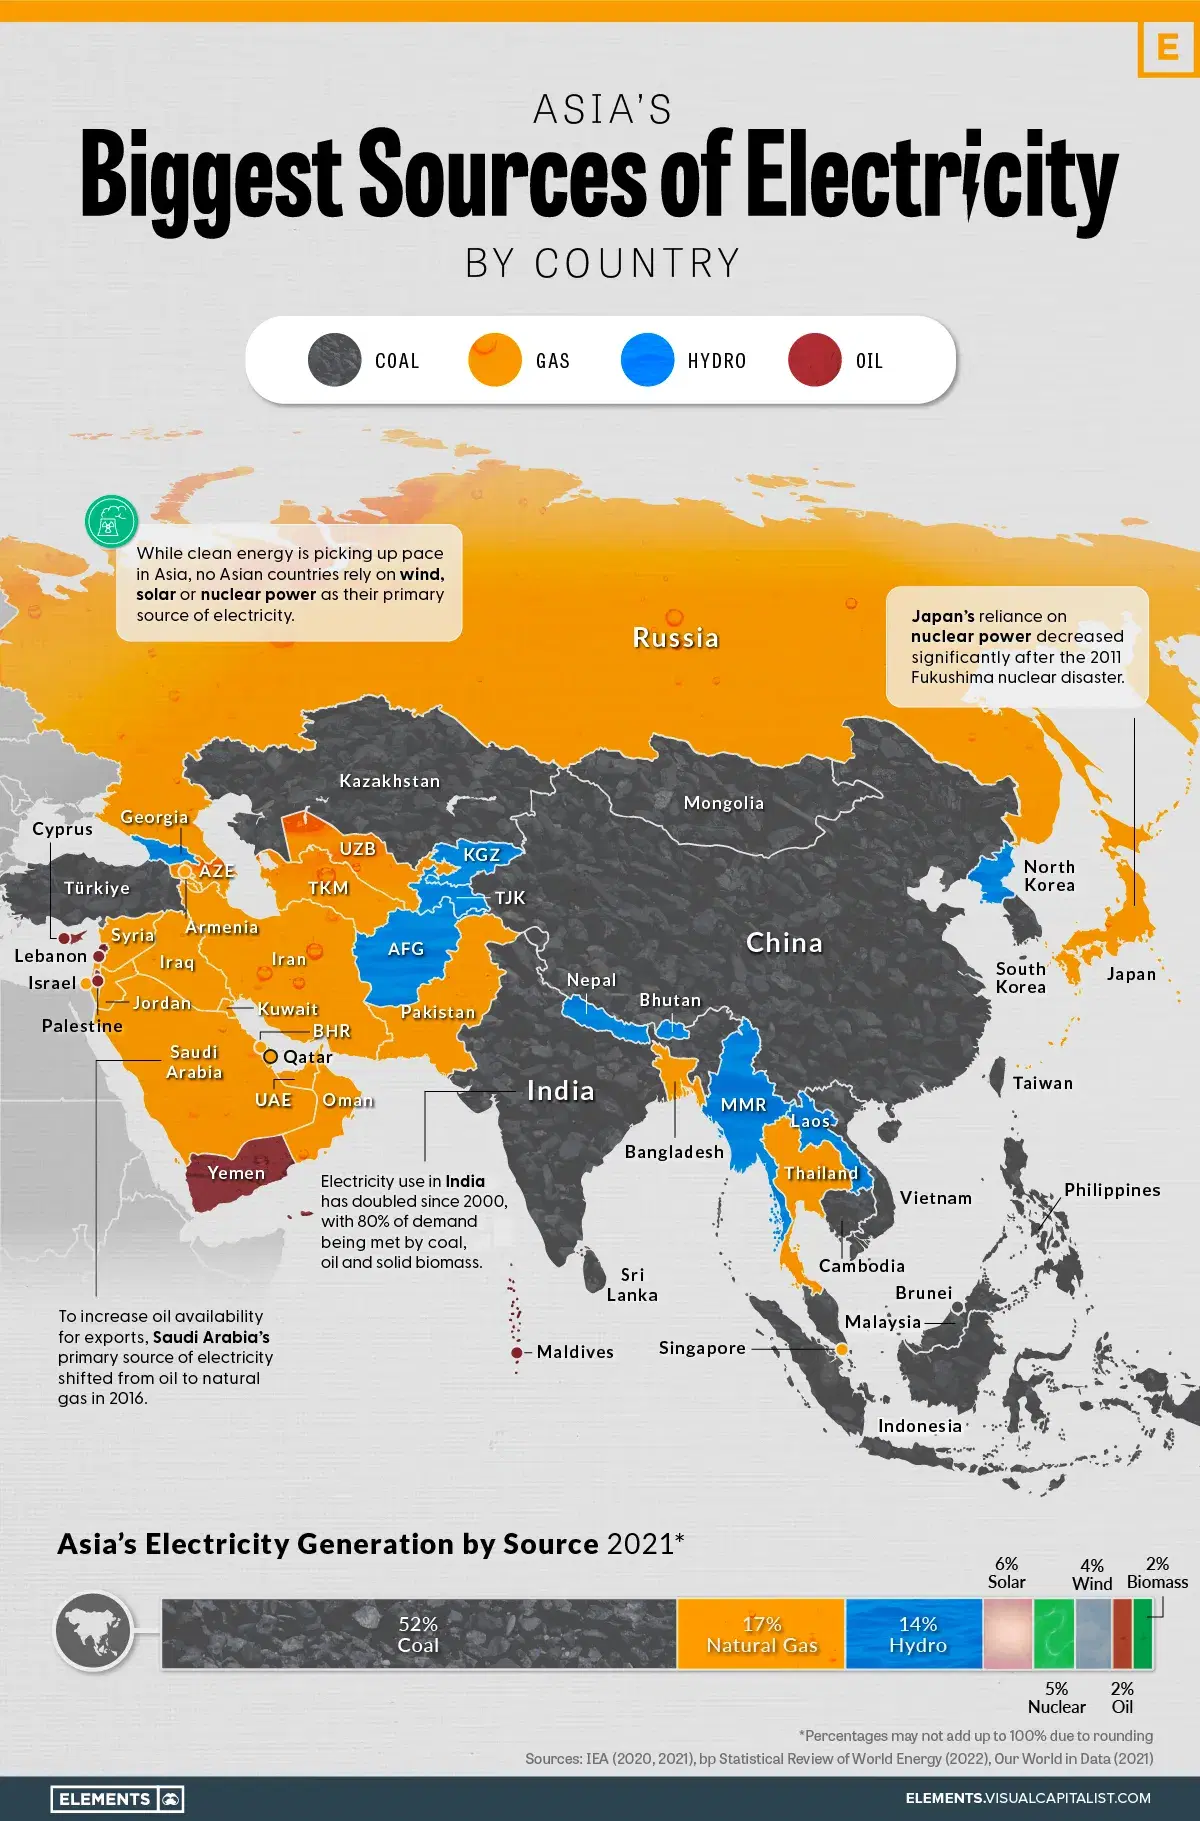 Asia’s Biggest Sources of Electricity by Country